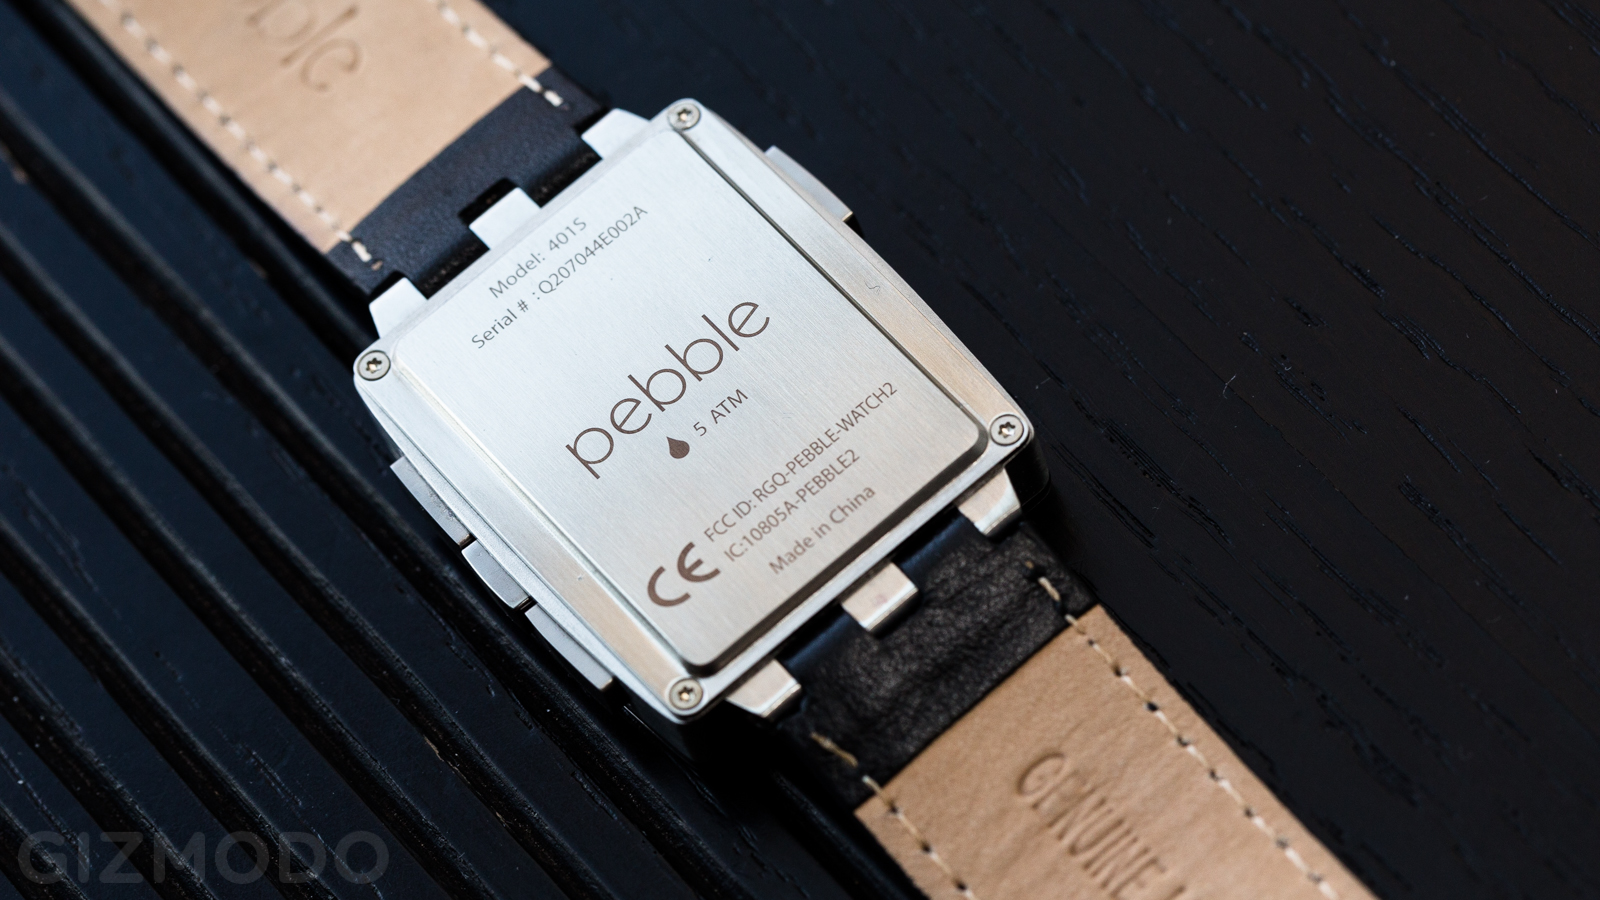 Pebble Steel Review: The Best Smartwatch, Now Also Beautiful